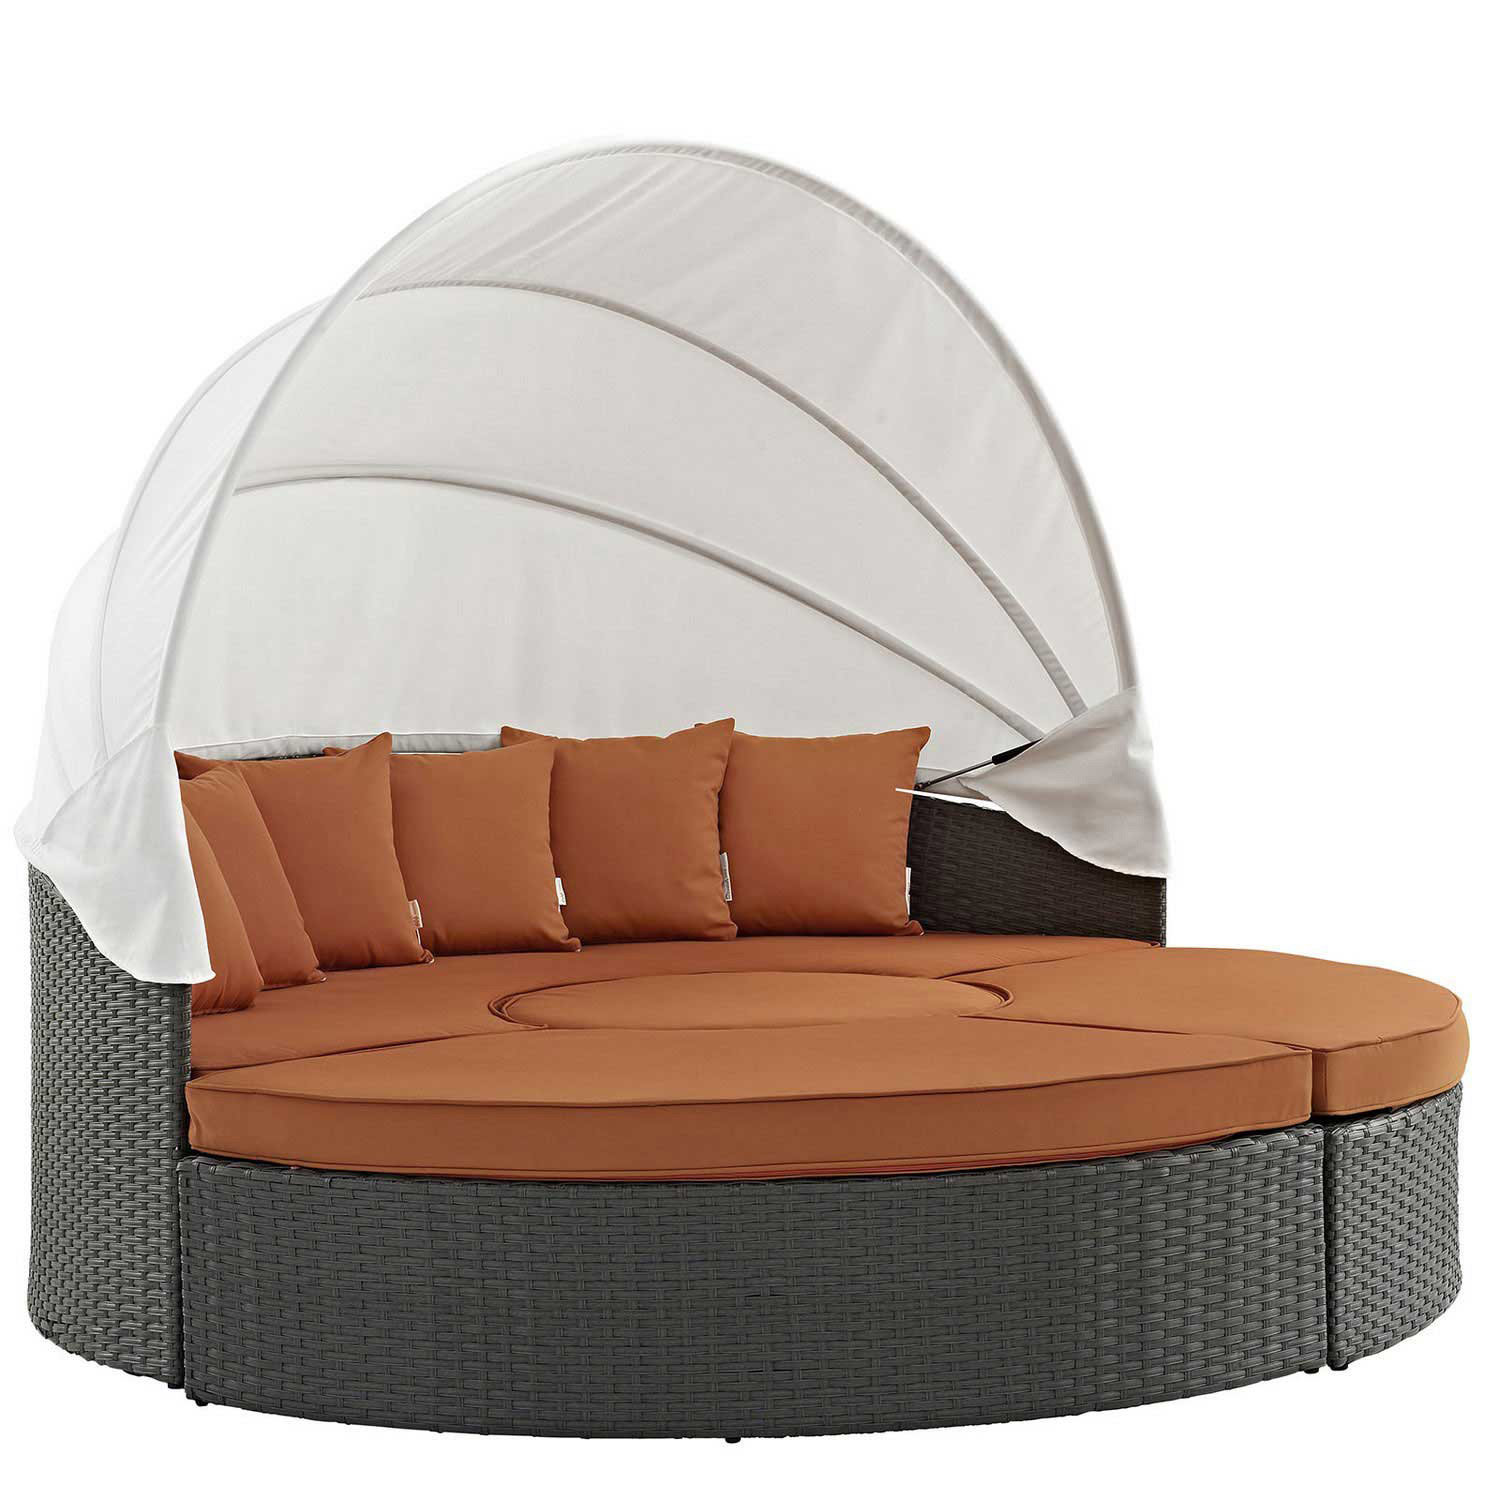 Modway Sojourn Outdoor Patio Sunbrella Daybed - Canvas Tuscan